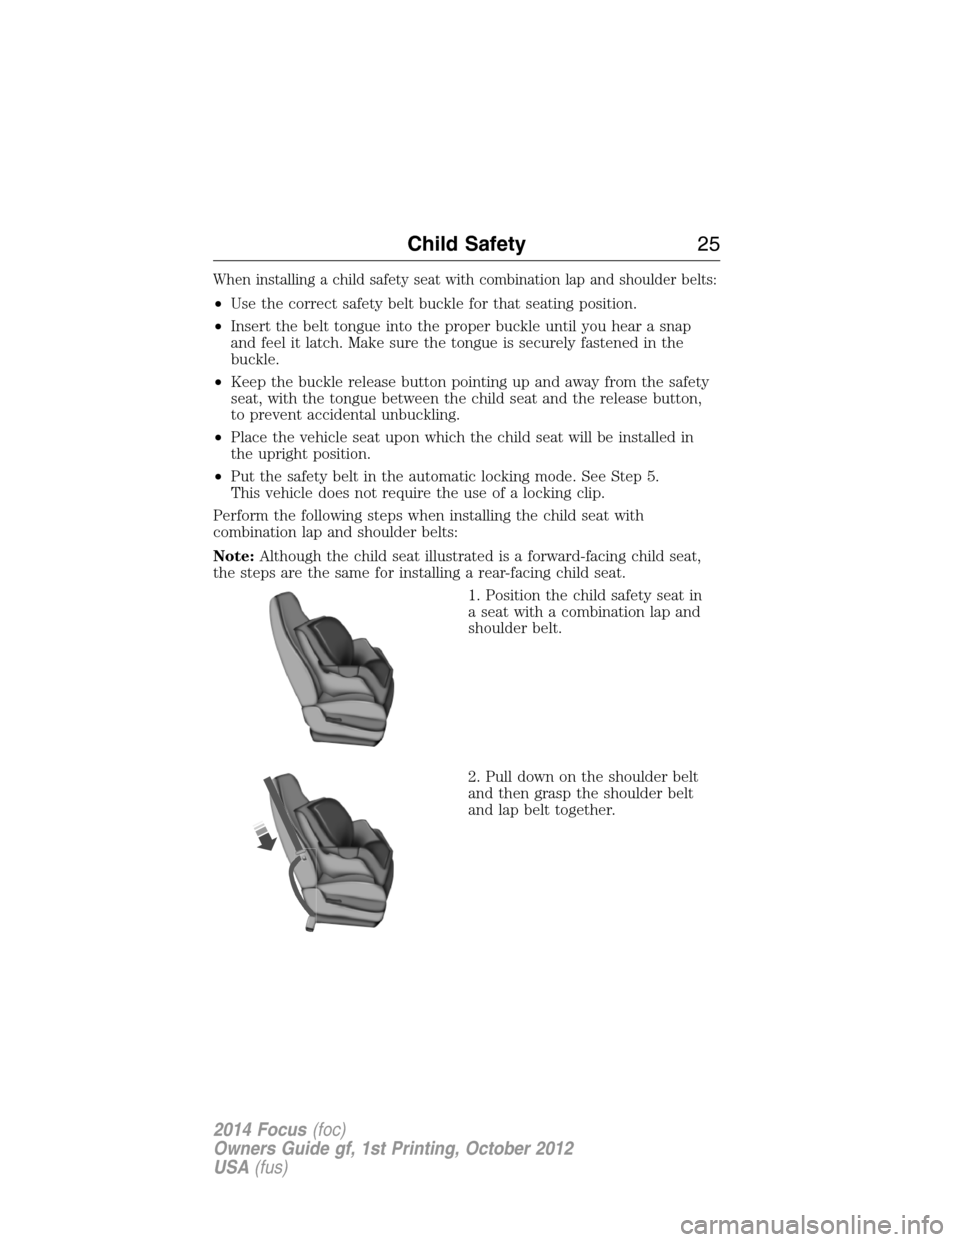 FORD FOCUS 2014 3.G User Guide When installing a child safety seat with combination lap and shoulder belts:
•Use the correct safety belt buckle for that seating position.
•Insert the belt tongue into the proper buckle until you